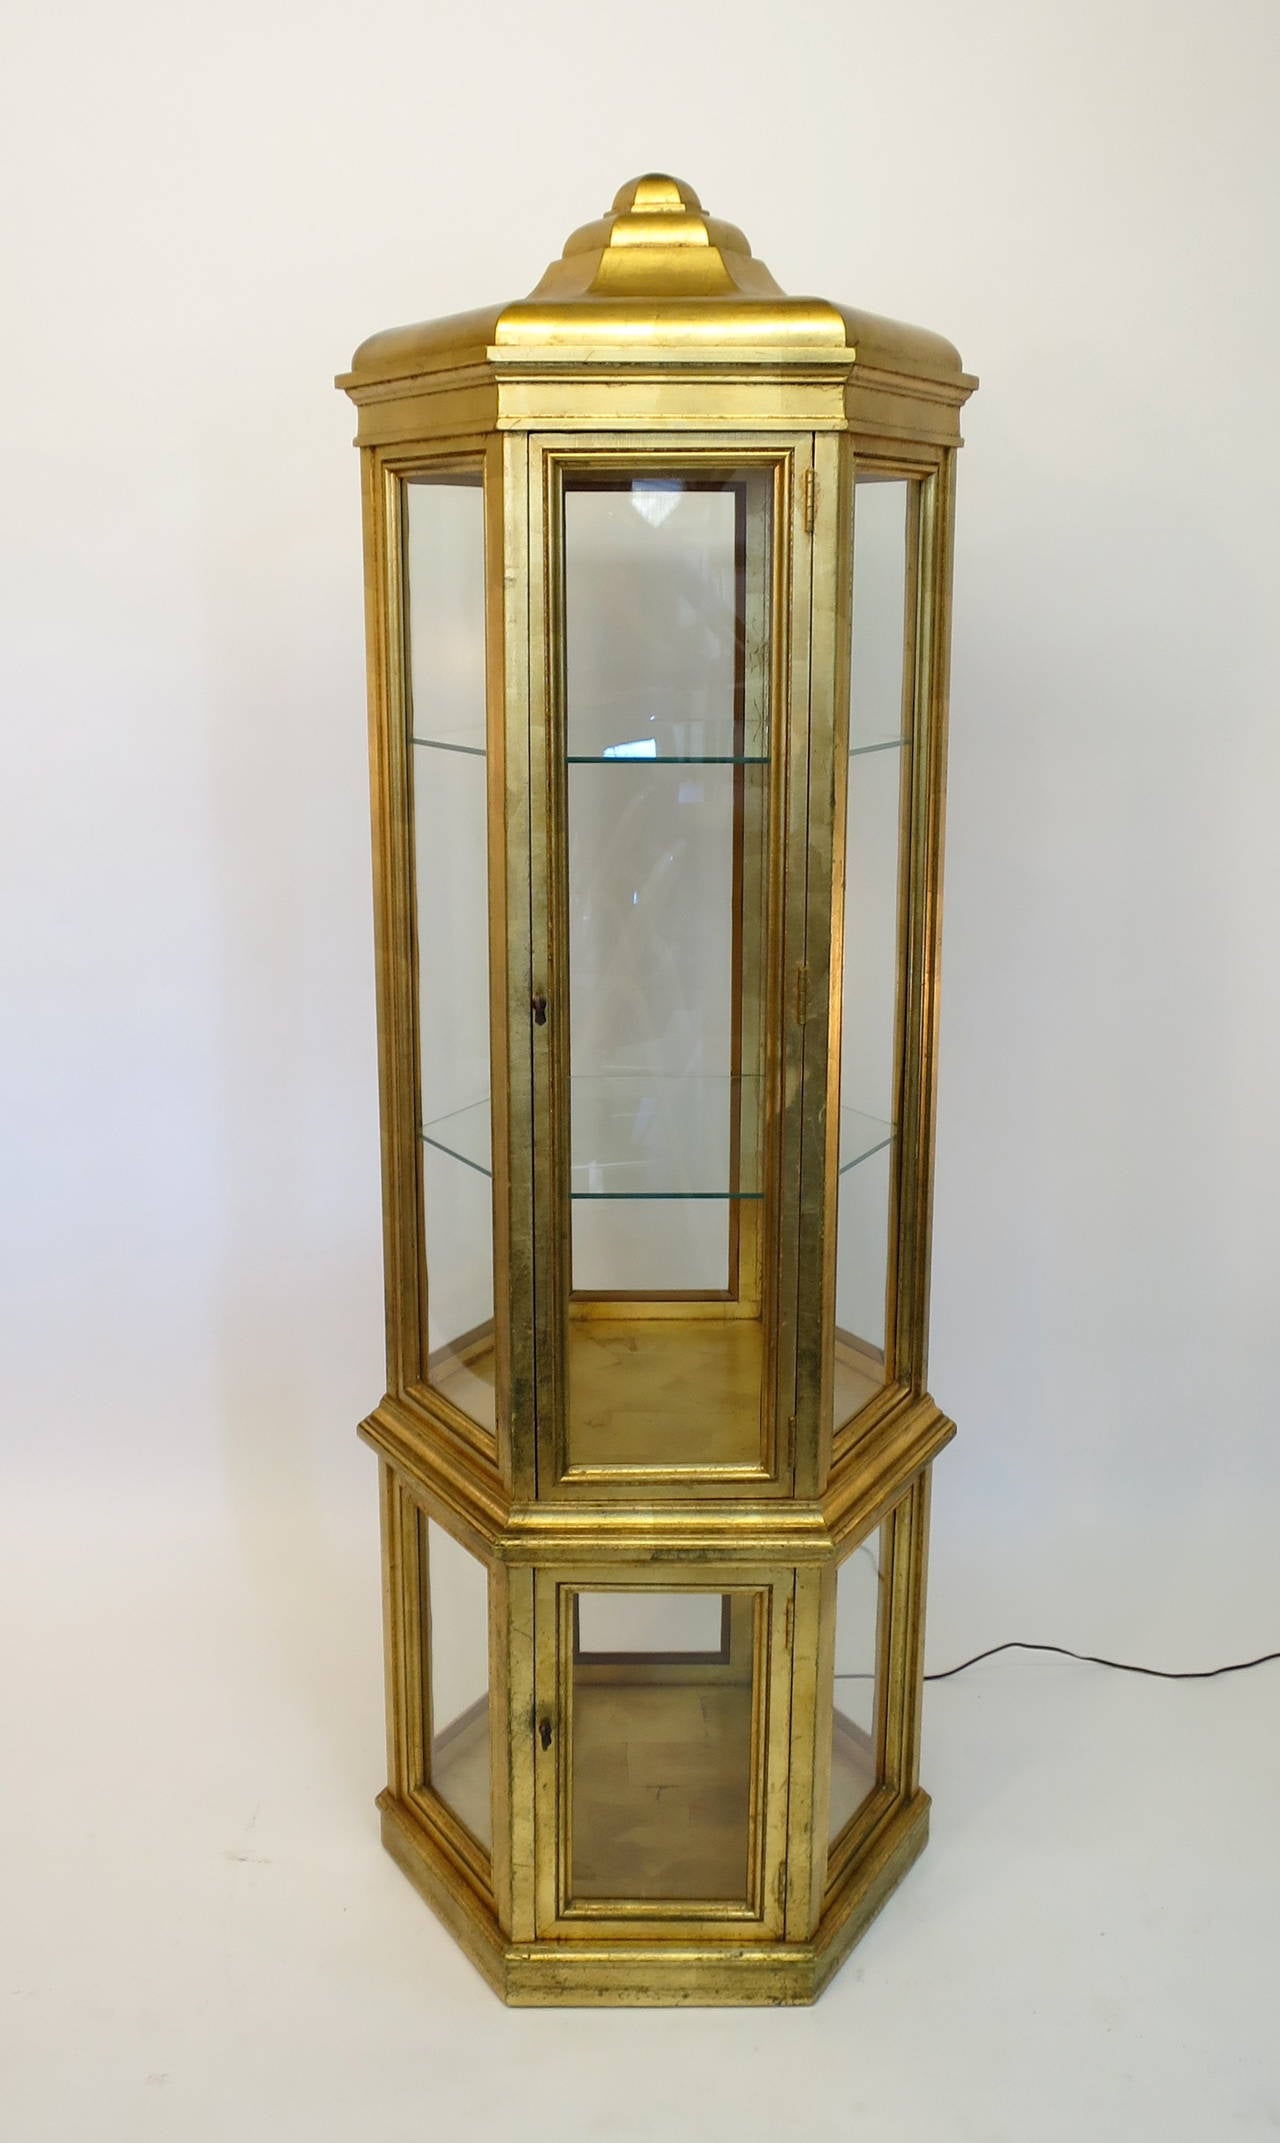 Beautiful gold leaf curio cabinet or vitrine manufactured by Weiman Furniture Company. Upper and lower storage with build-in lighting. Gold leaf on interior and all exterior sides. Features two doors and two glass shelves. Very nice original